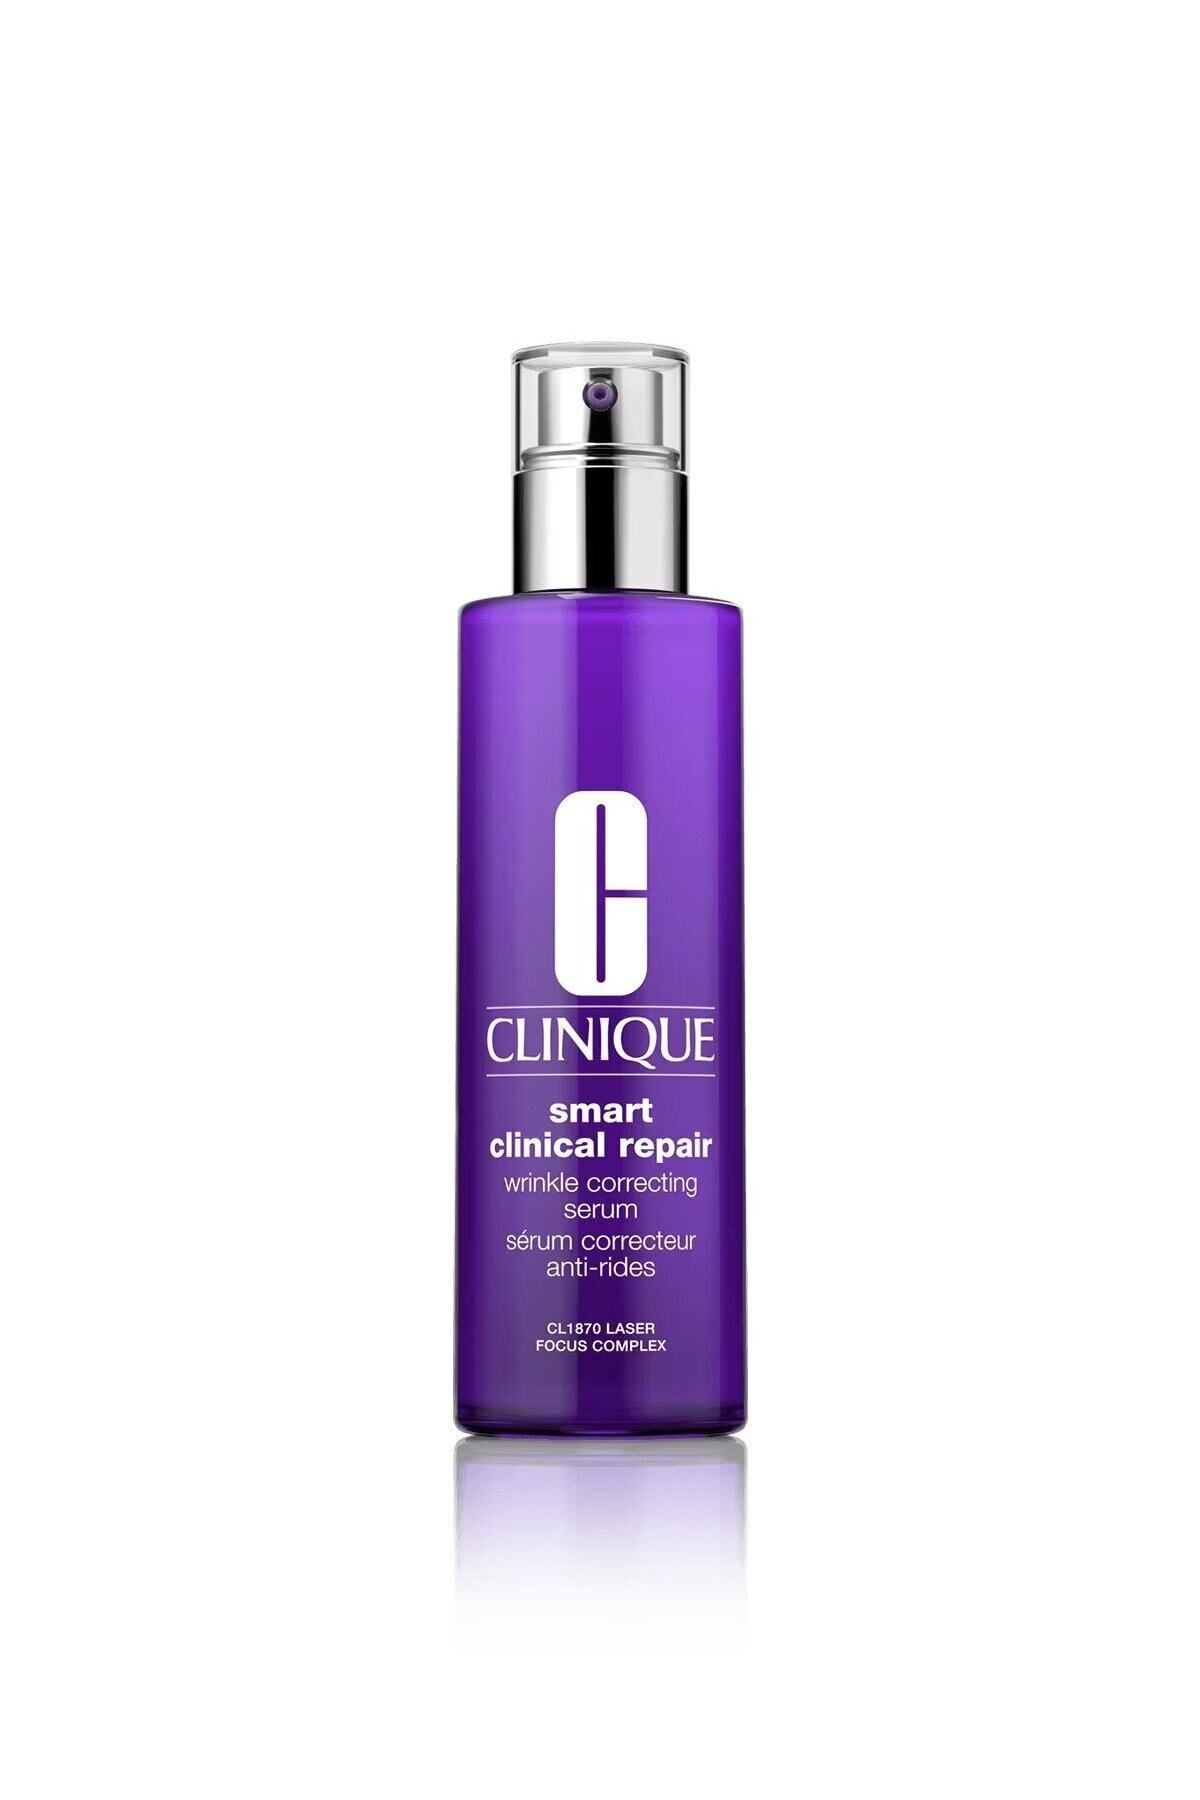 Clinique PLUMPİNG MOİSTURİZİNG SKIN RENEWING AND ANTİ-WRİNKLE SERUM 50ML DKHAİR353